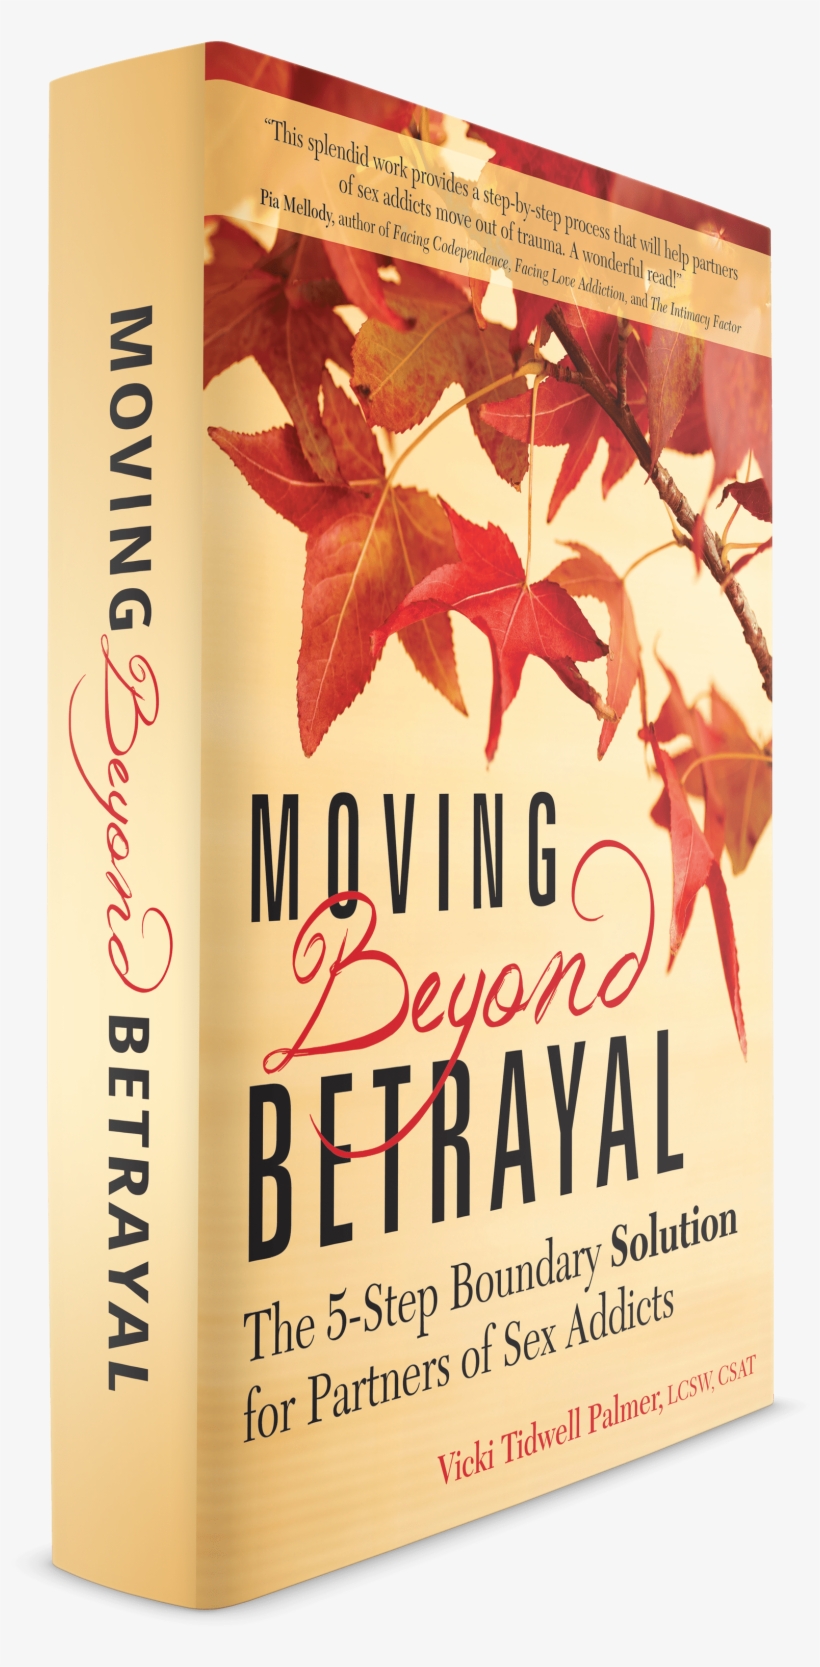 Book Cover Large - Moving Beyond Betrayal: The 5-step Boundary Solution, transparent png #1032163